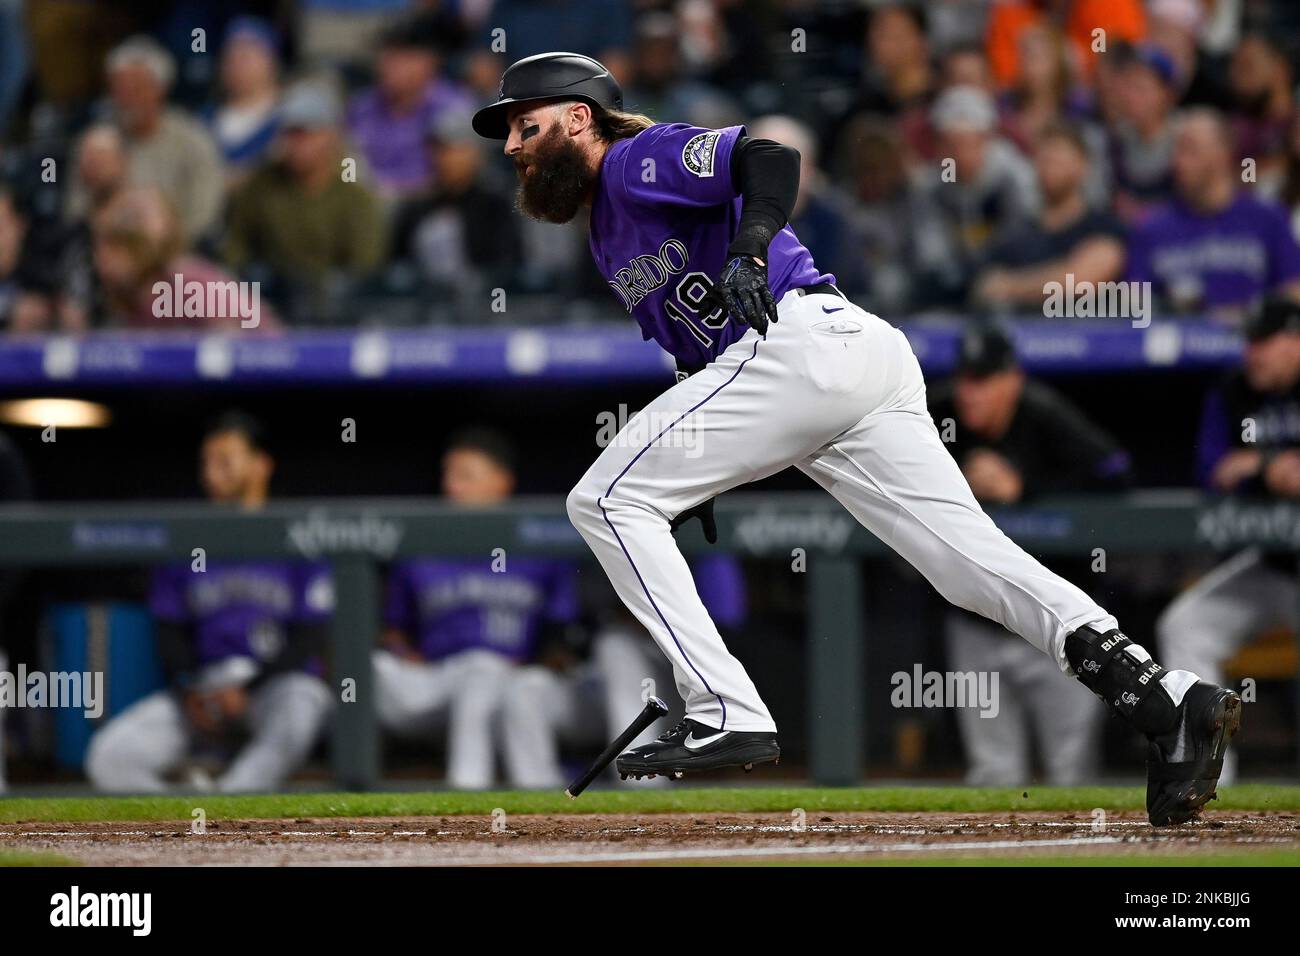 PHOENIX, AZ - MARCH 16: Rockies Charlie Blackmon bats during a spring  training game between the Colorado Rockies and the Milwaukee Brewers March  16, 2019 at American Family Fields of Phoenix in